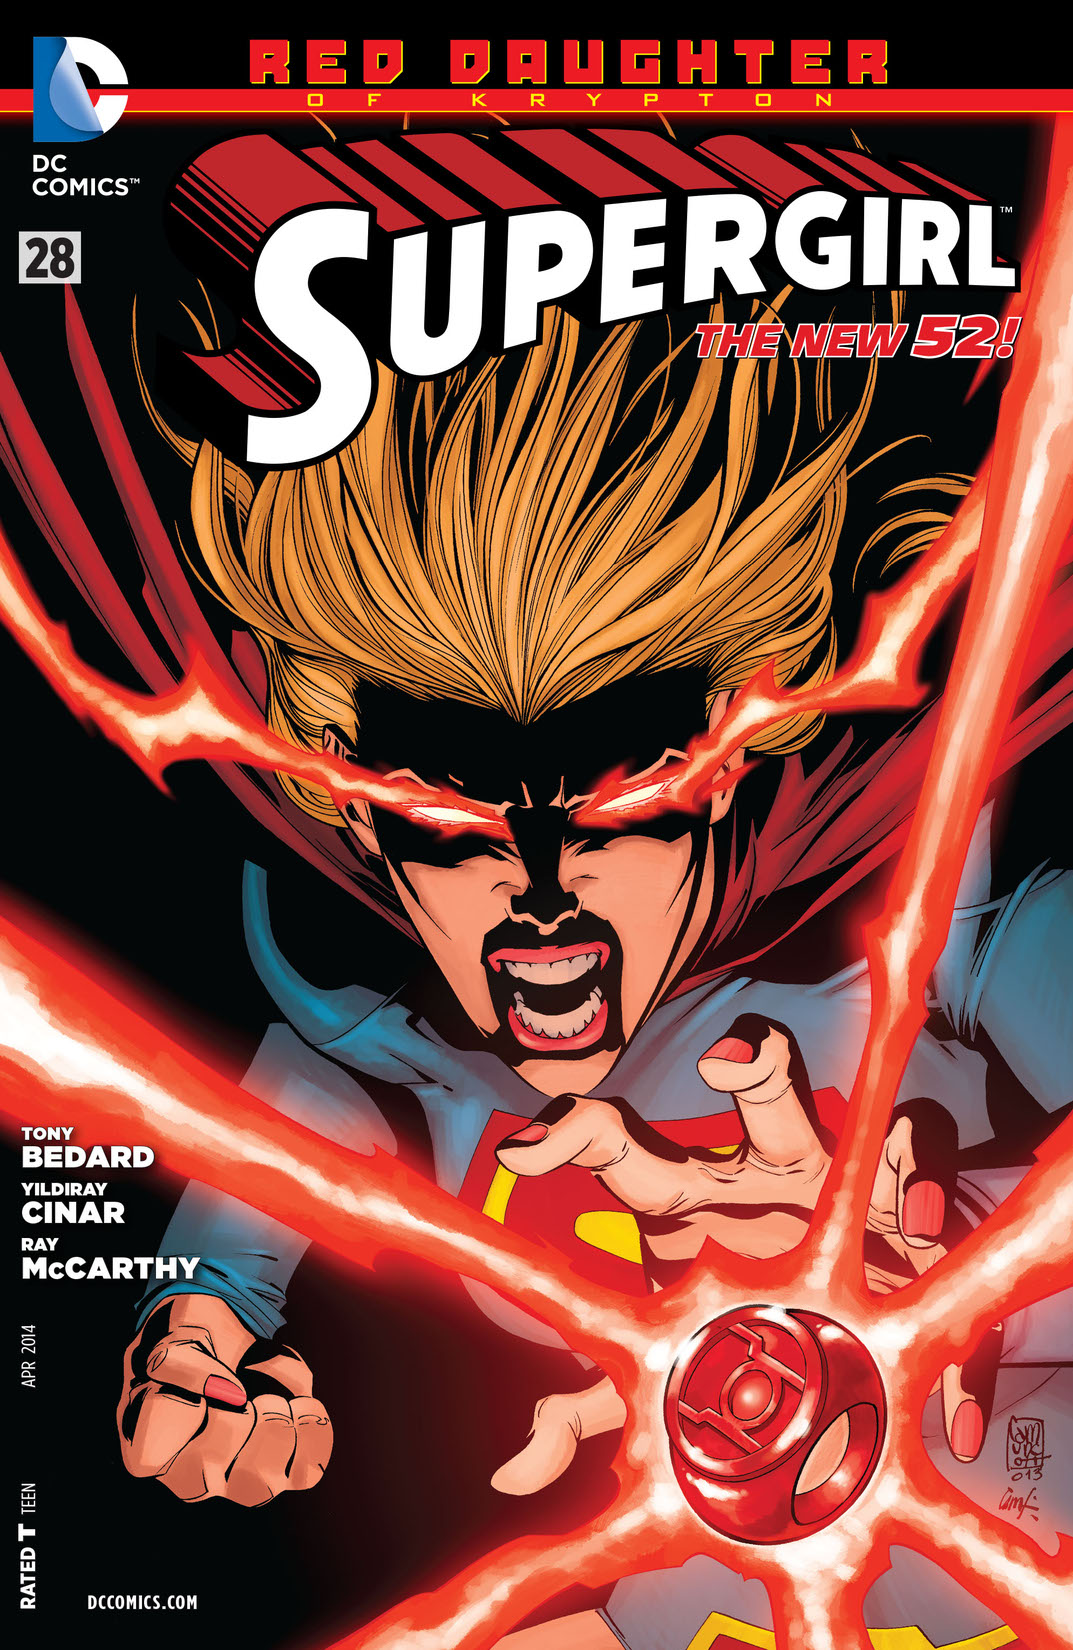 Supergirl (2011-) #28 preview images